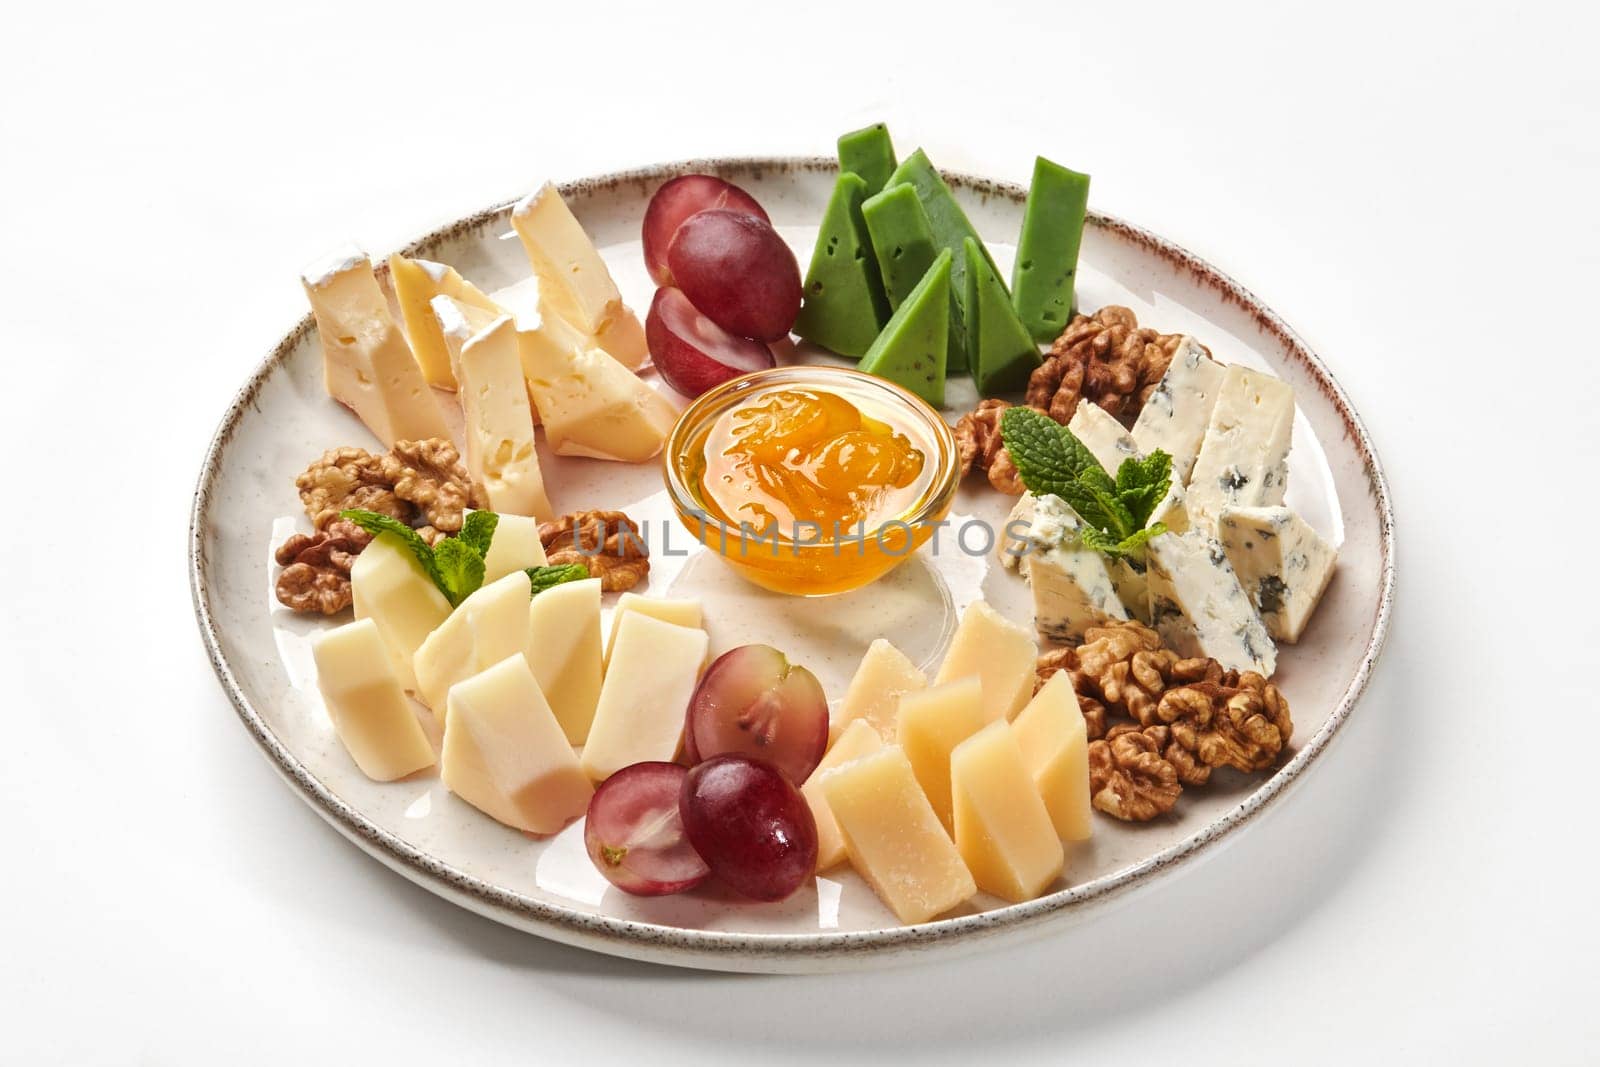 Assorted cheese selection traditionally served with walnuts, grapes and bowl of honey on ceramic plate, on white background. Delicious appetizer